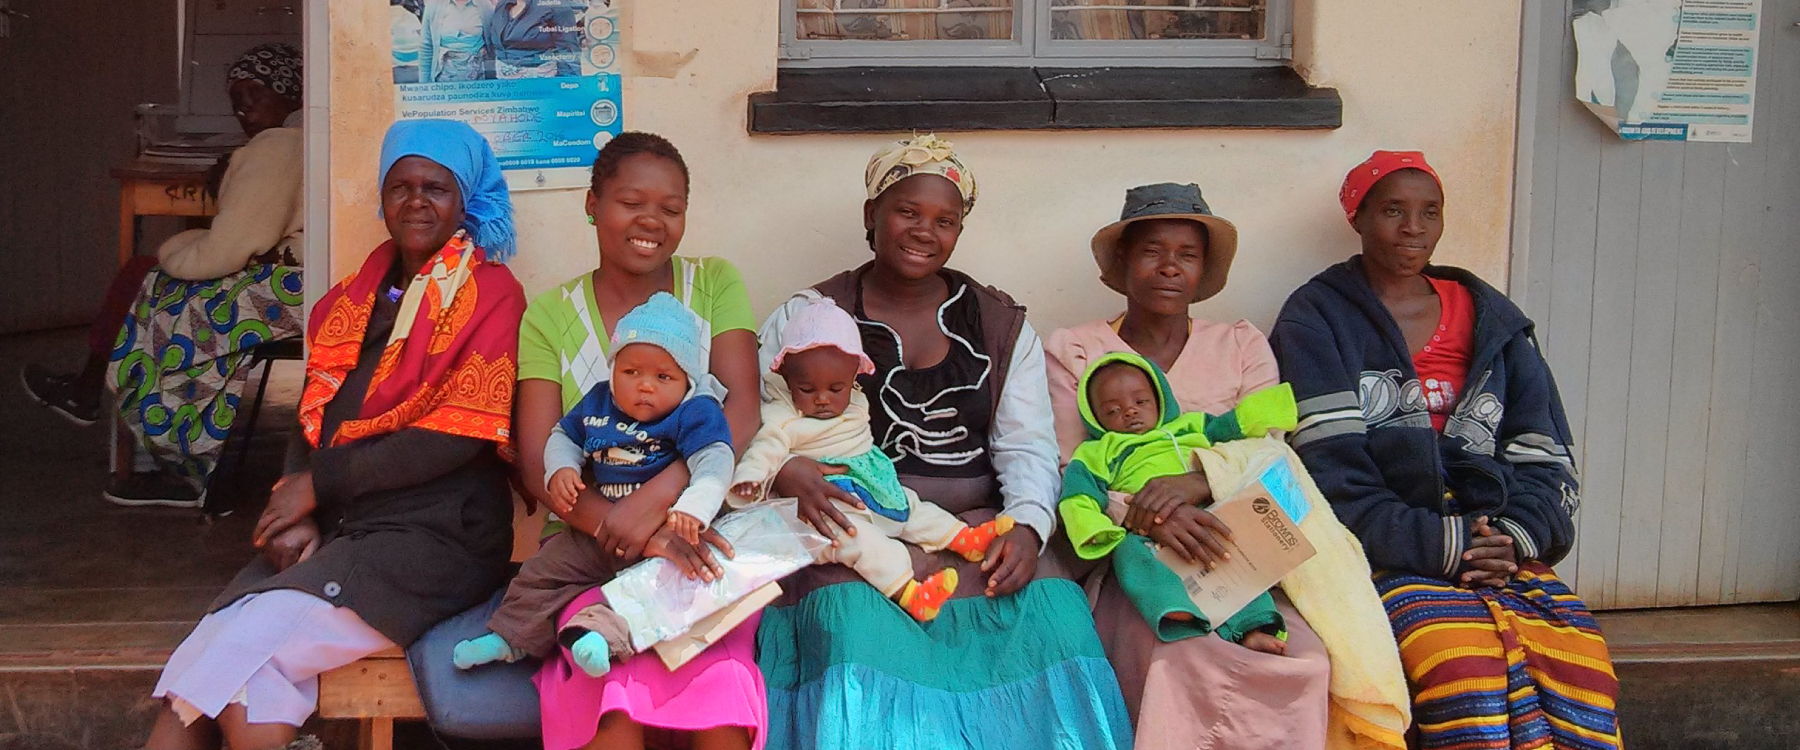 Five women sit on a bench outside a ‘Treatment room’ and ‘Consultation room’. They are brightly clothed, smiling and holding three babies.